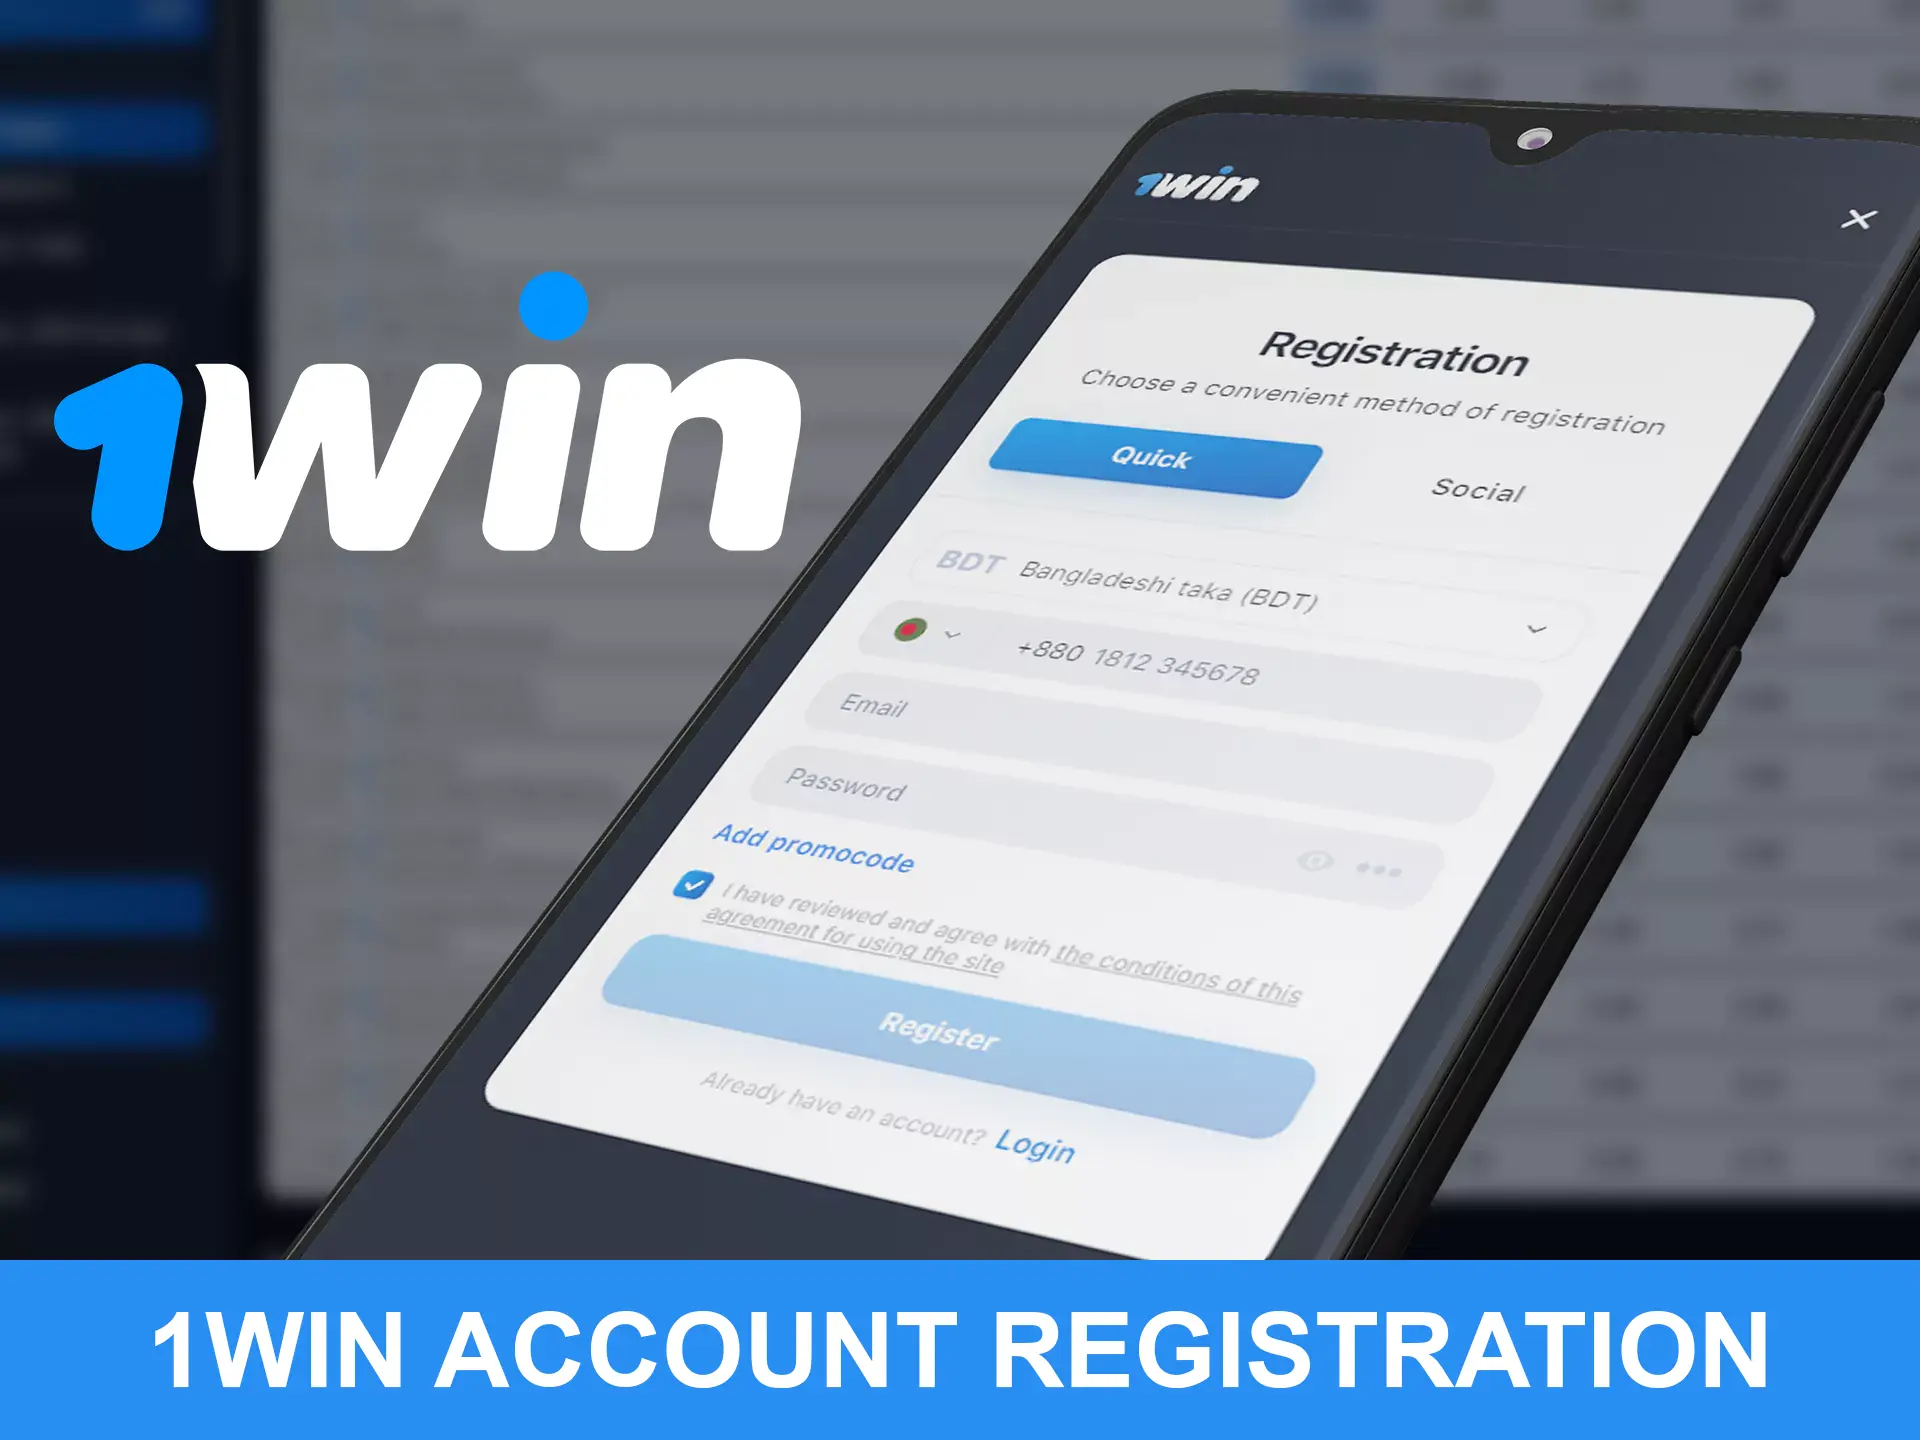 You can start betting after simply verifying your account on the 1Win platform.